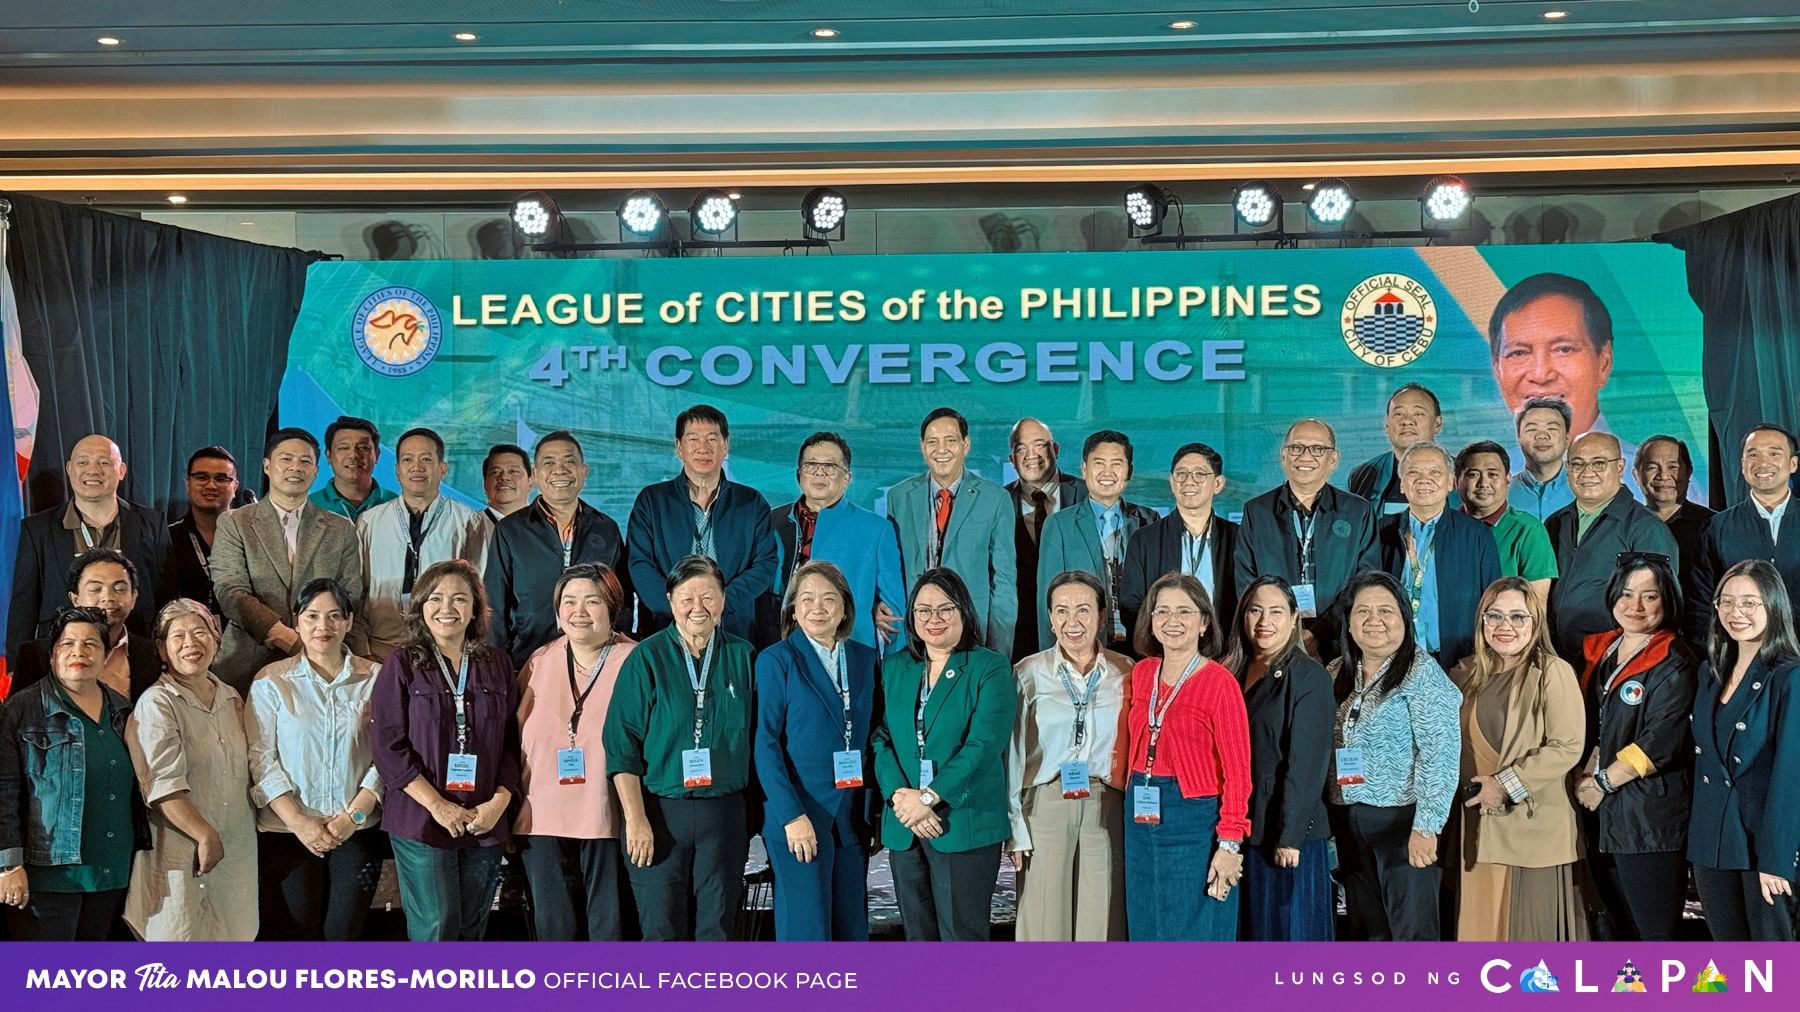 League of Cities of the Philippines (LCP) 4th Convergence